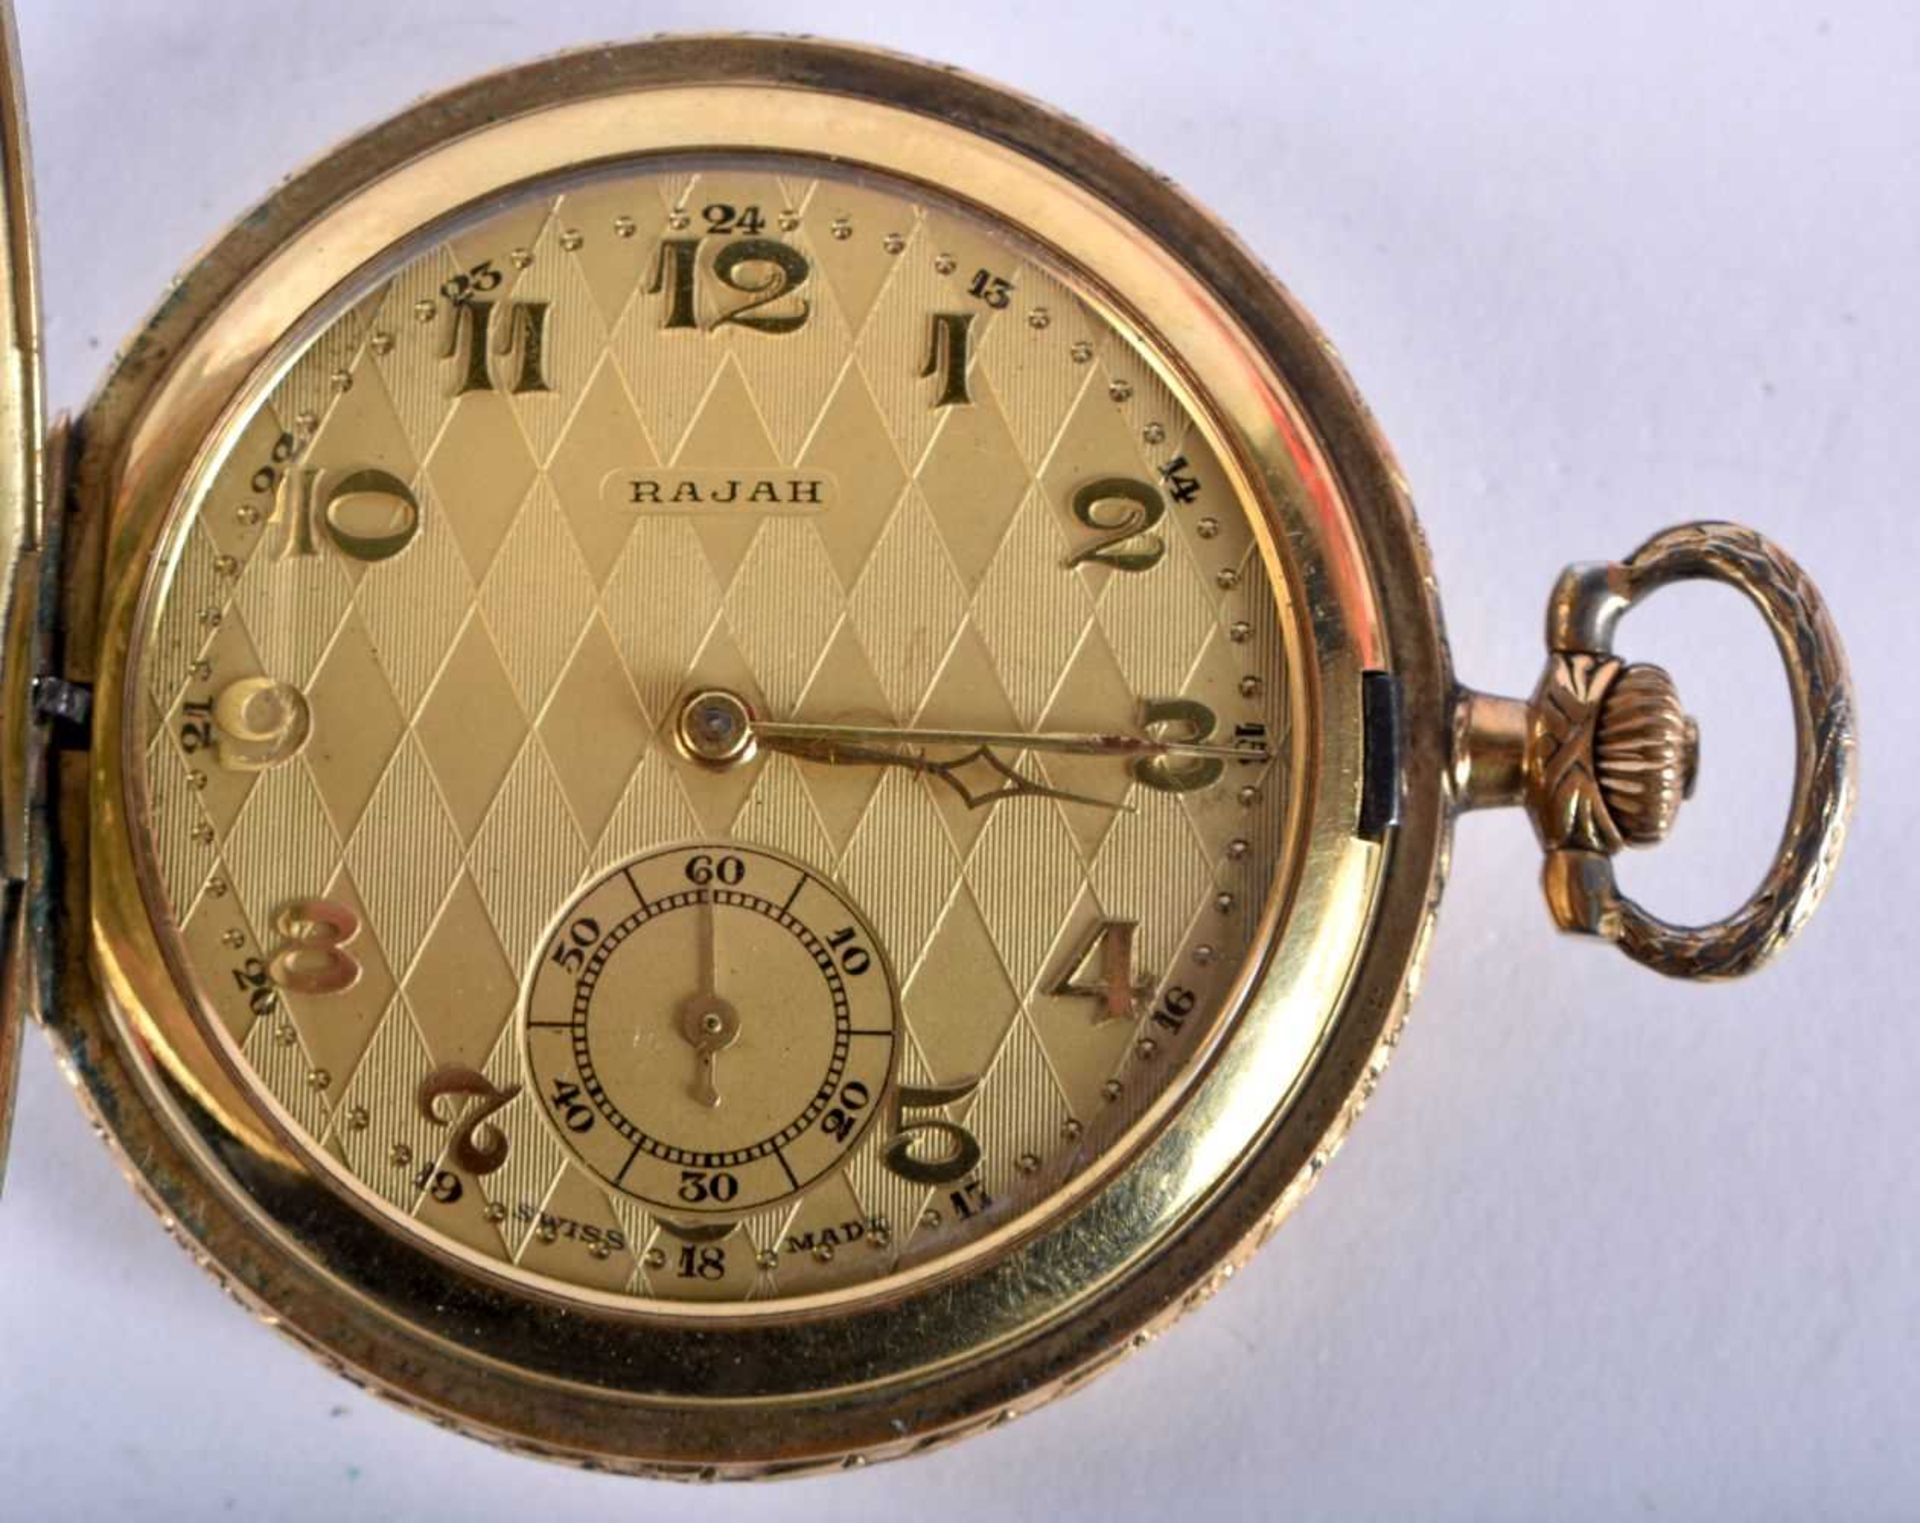 THOMAS RUSSELL Gents Rolled Gold Open Face Pocket Watch. Movement - Hand-wind. WORKING - Tested